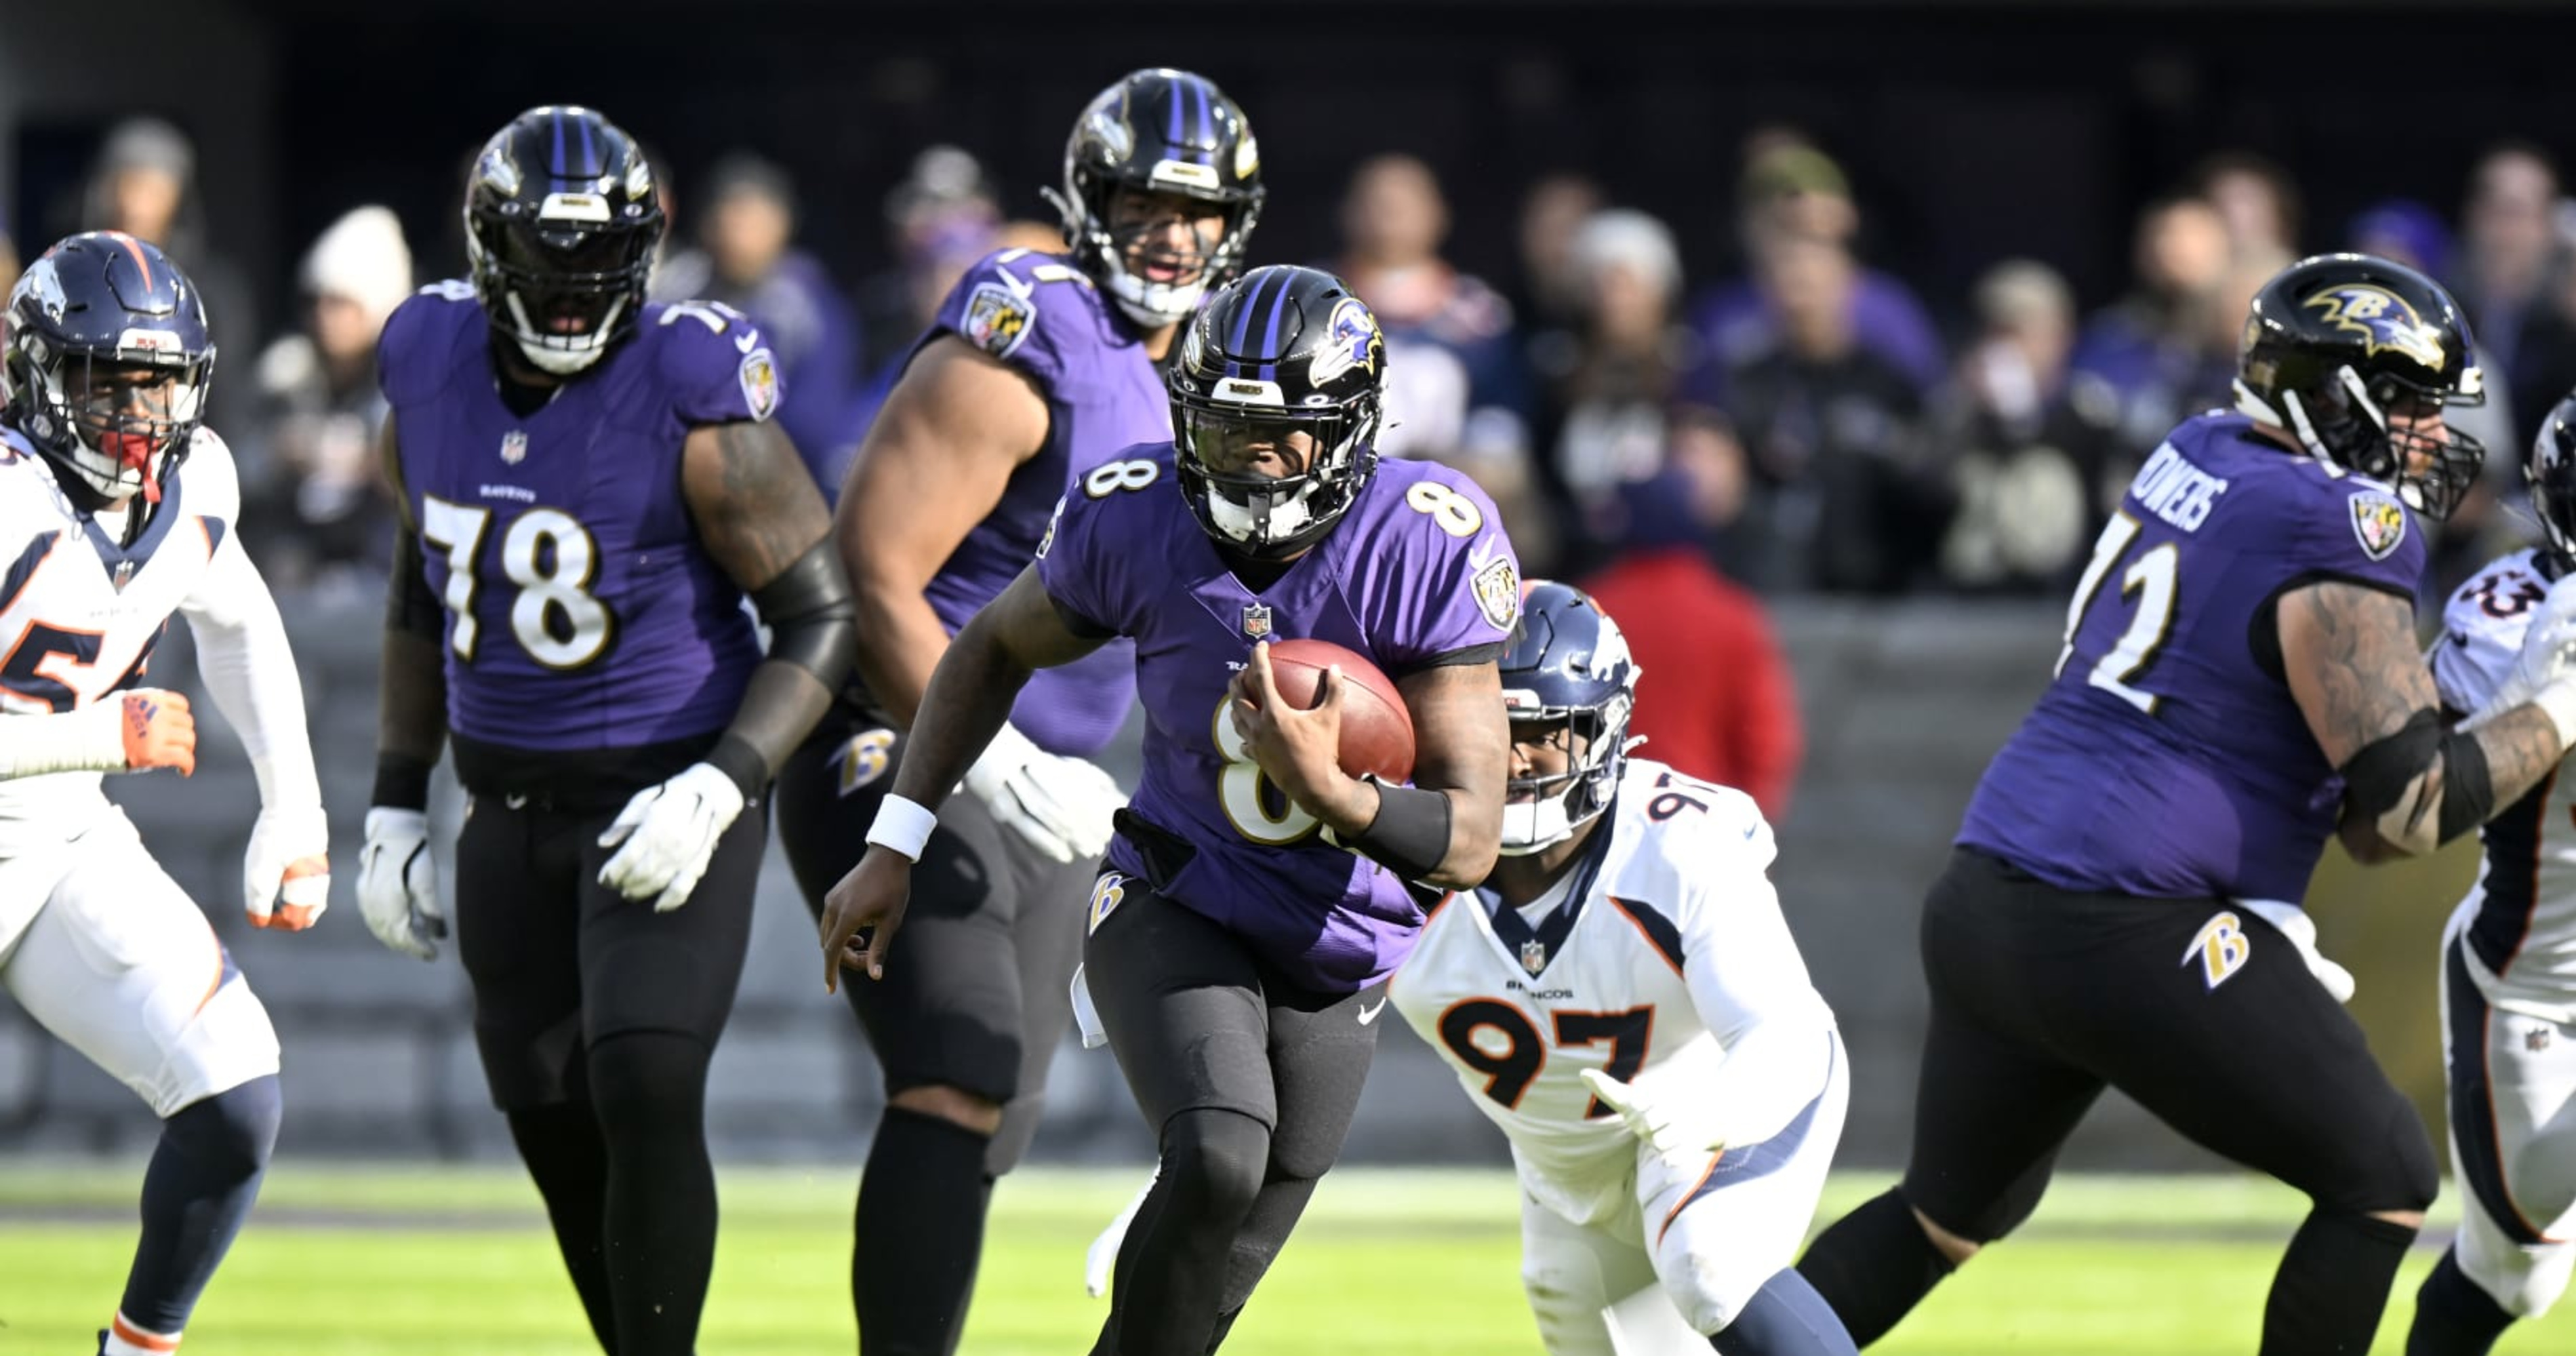 2023 Baltimore Ravens Schedule Full Listing of Dates, Times and TV